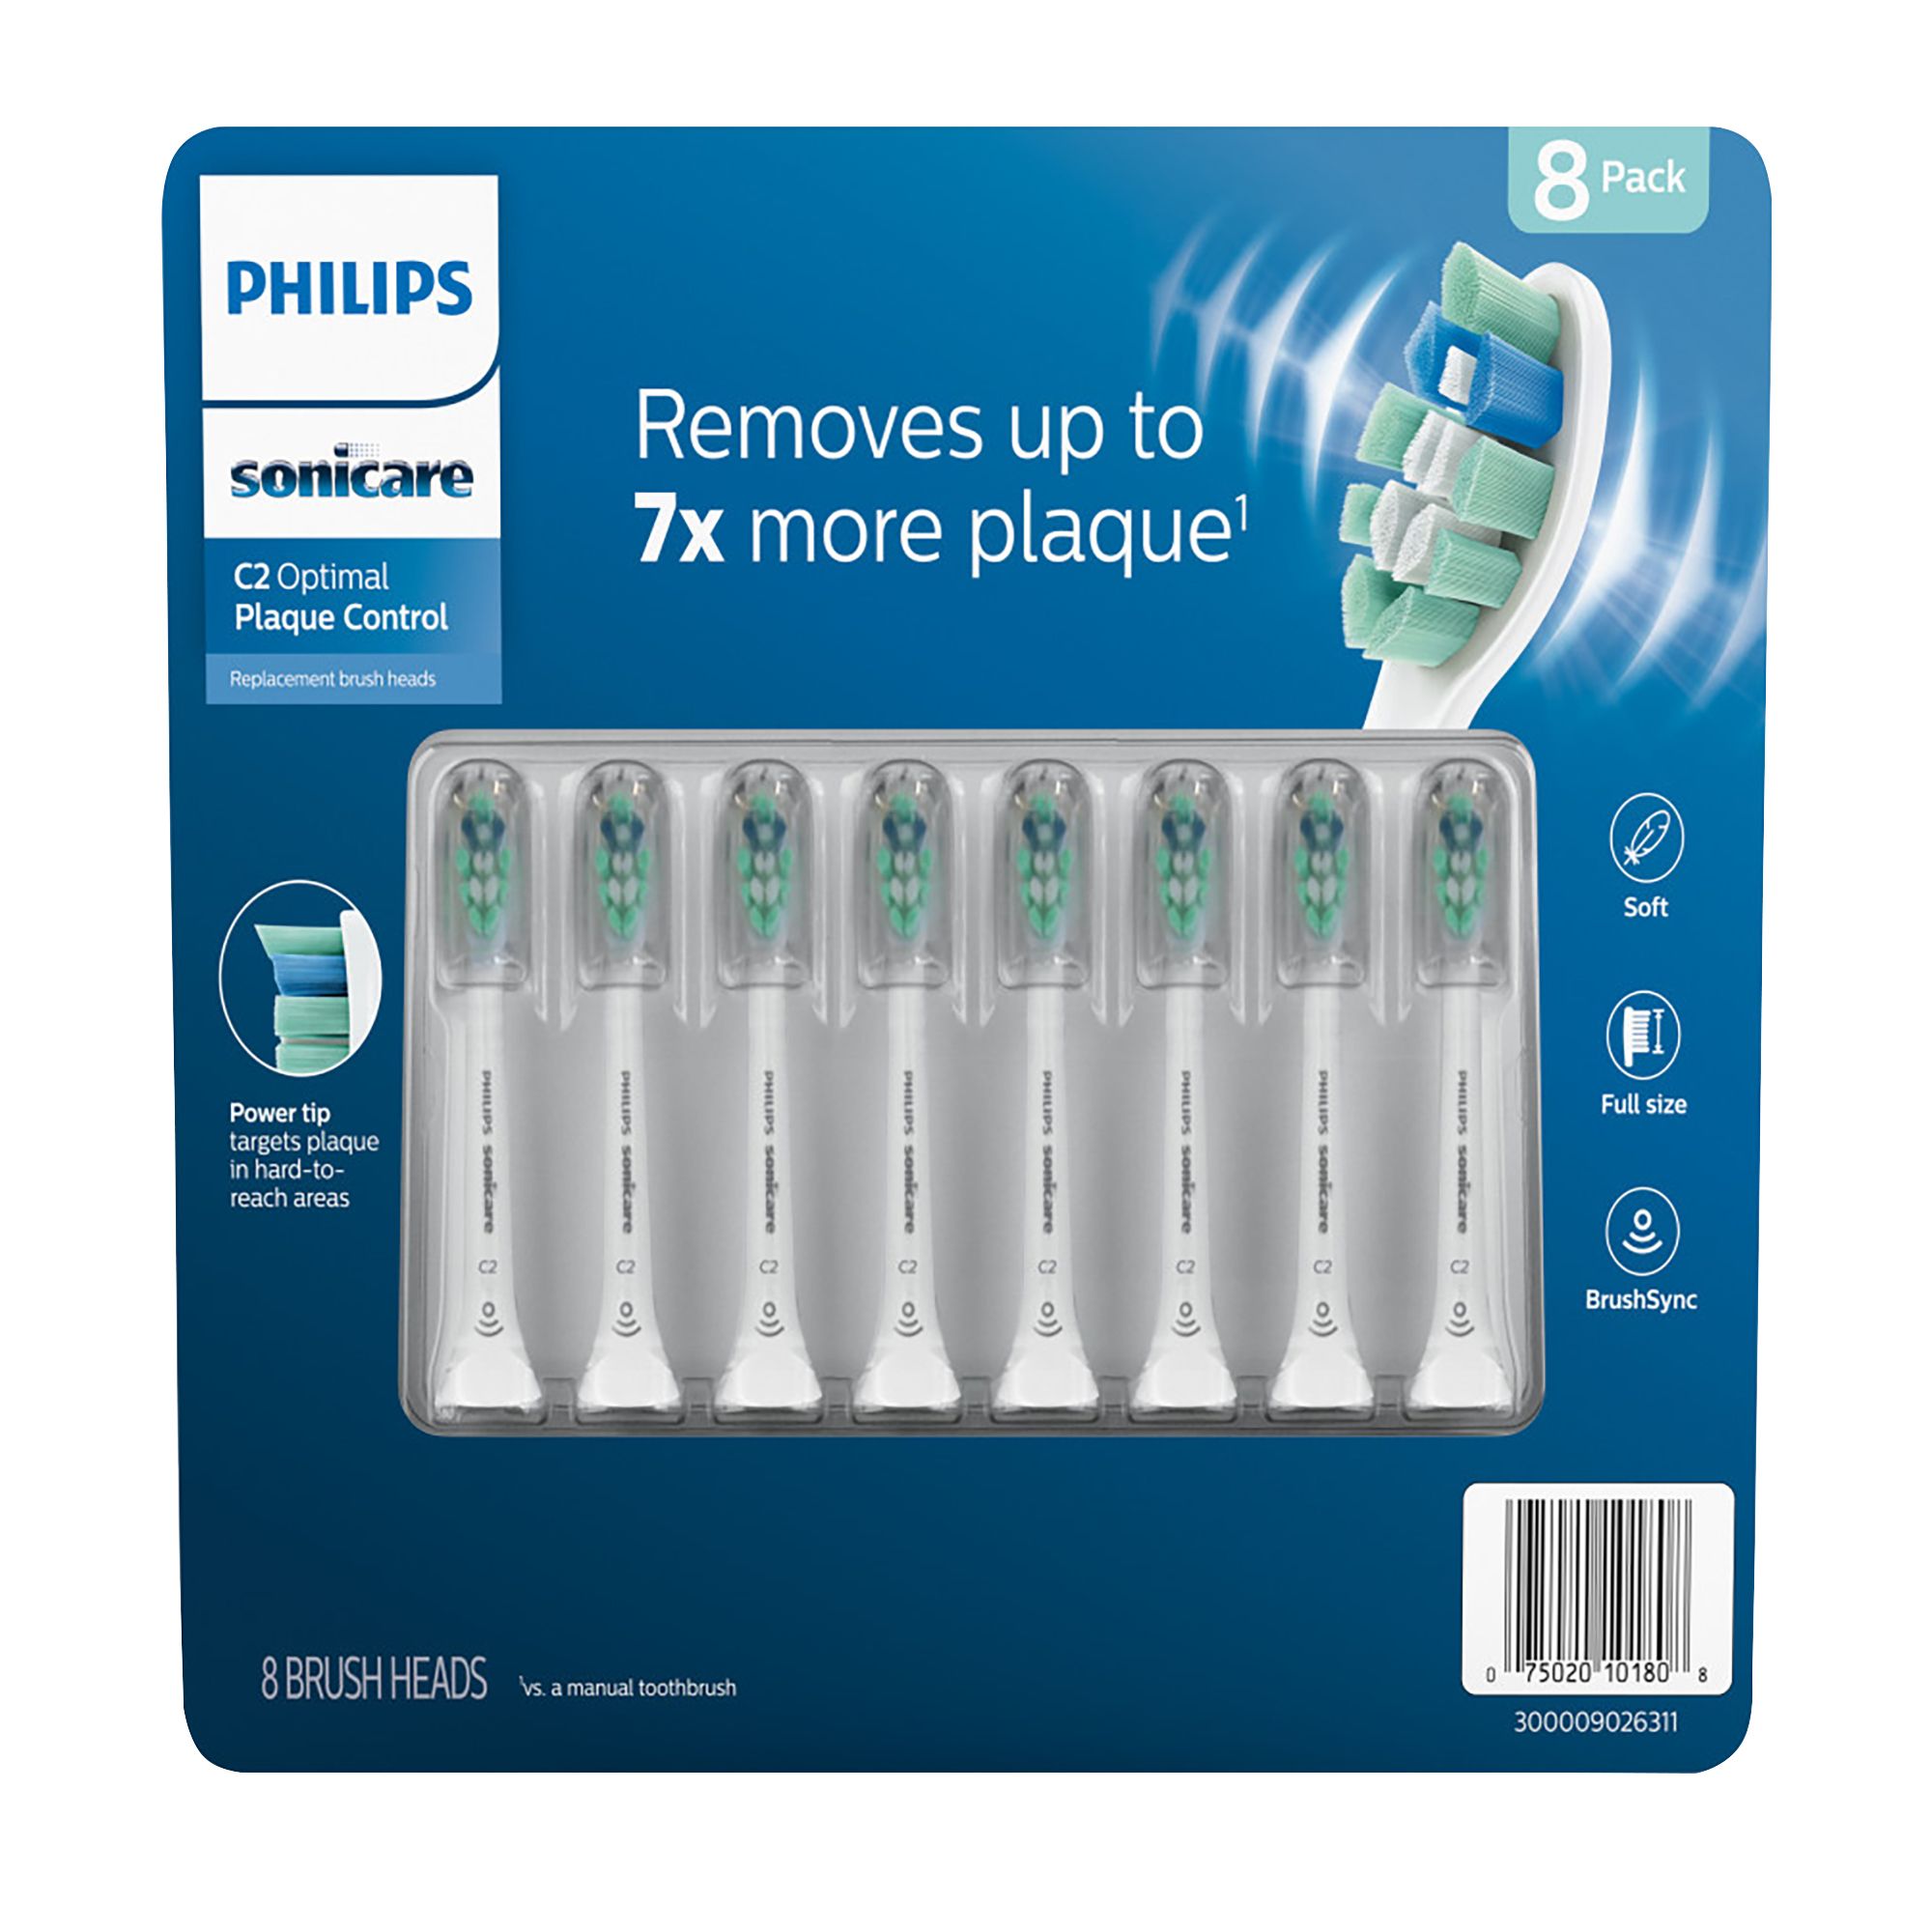 Philips Sonicare Replacement Toothbrush Heads, 8 pk., White